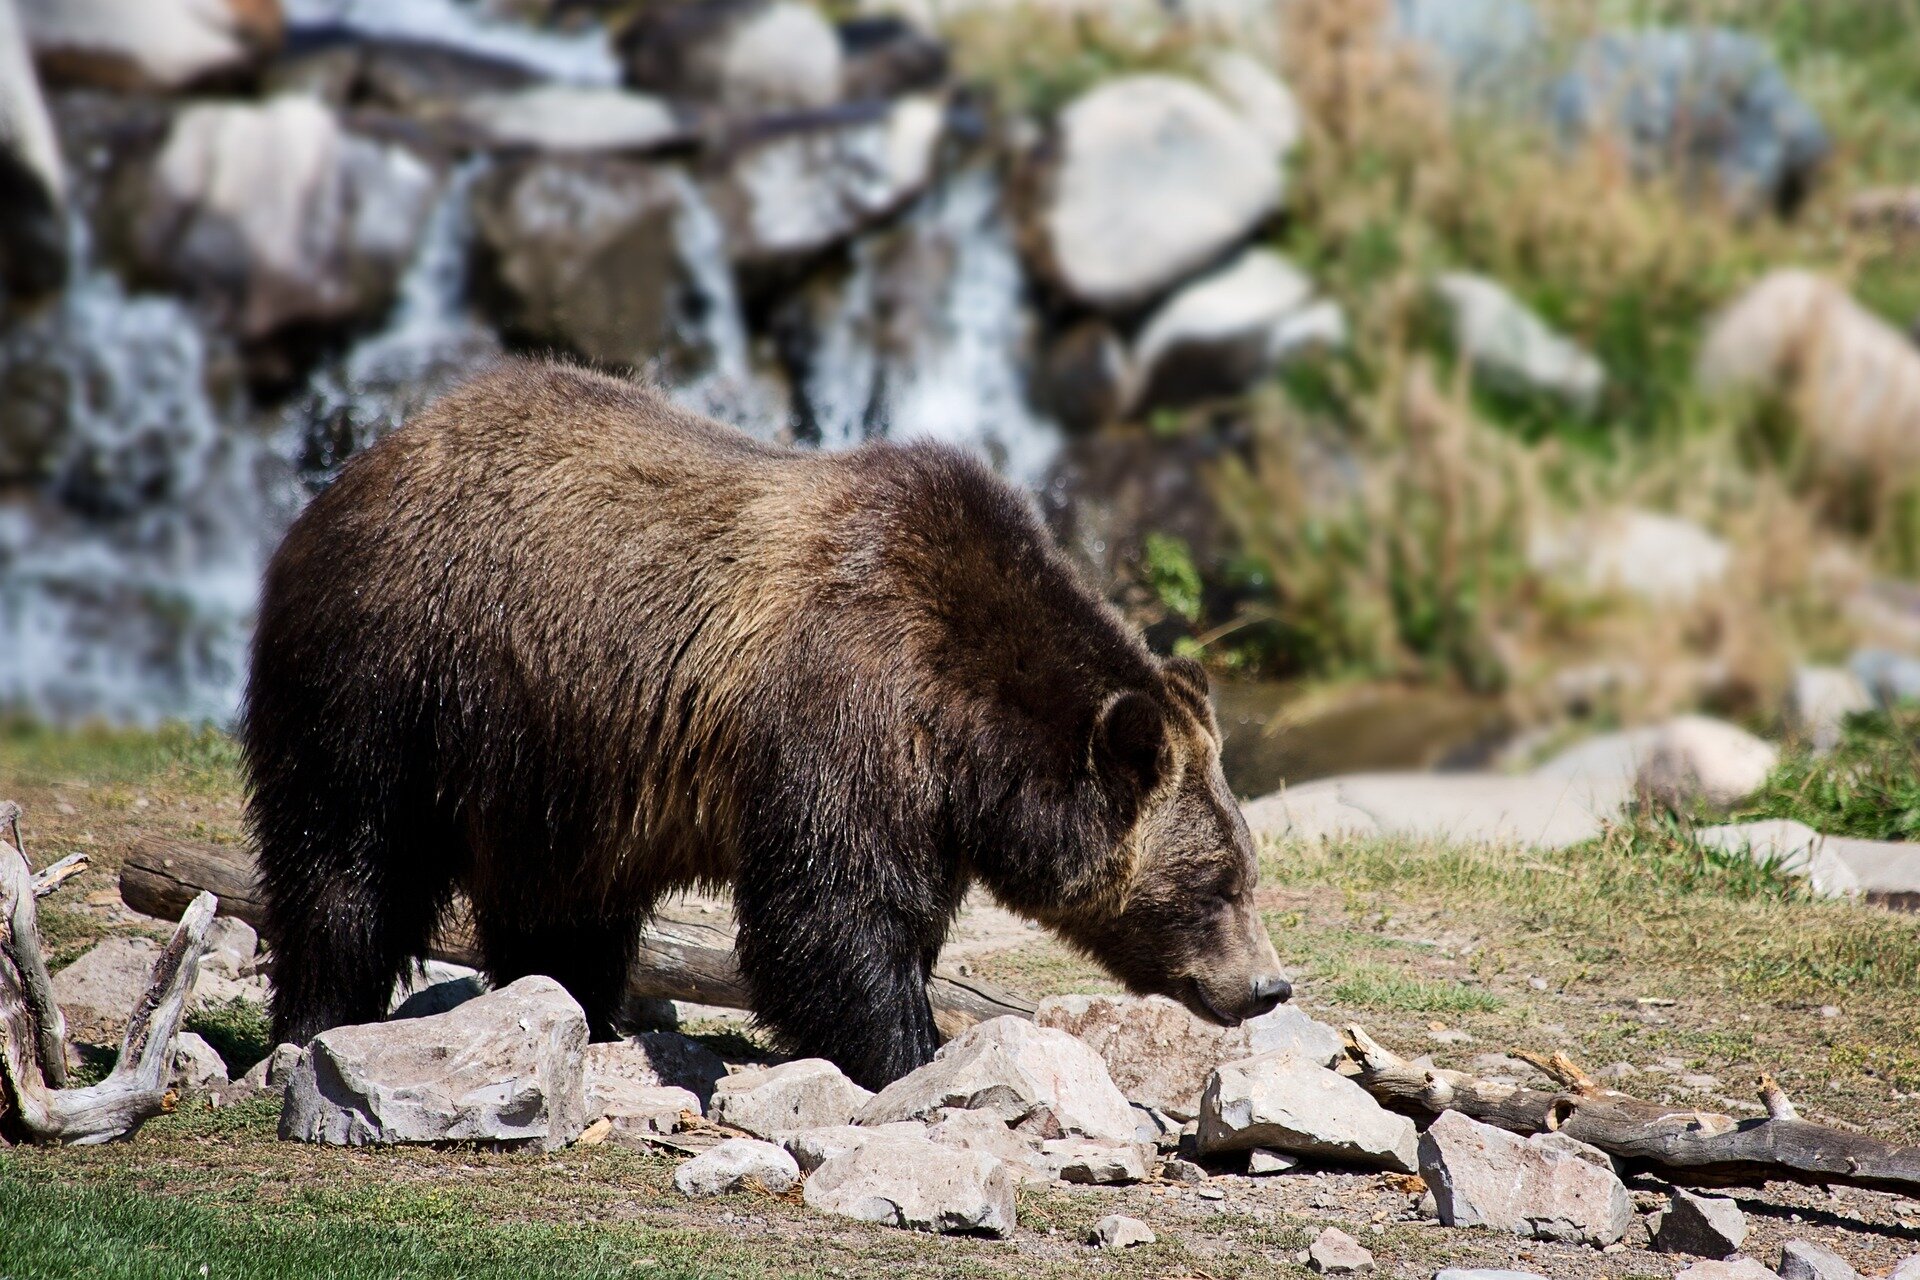 More grizzlies in Idaho? Federal proposal could make it happen as Republicans push delisting